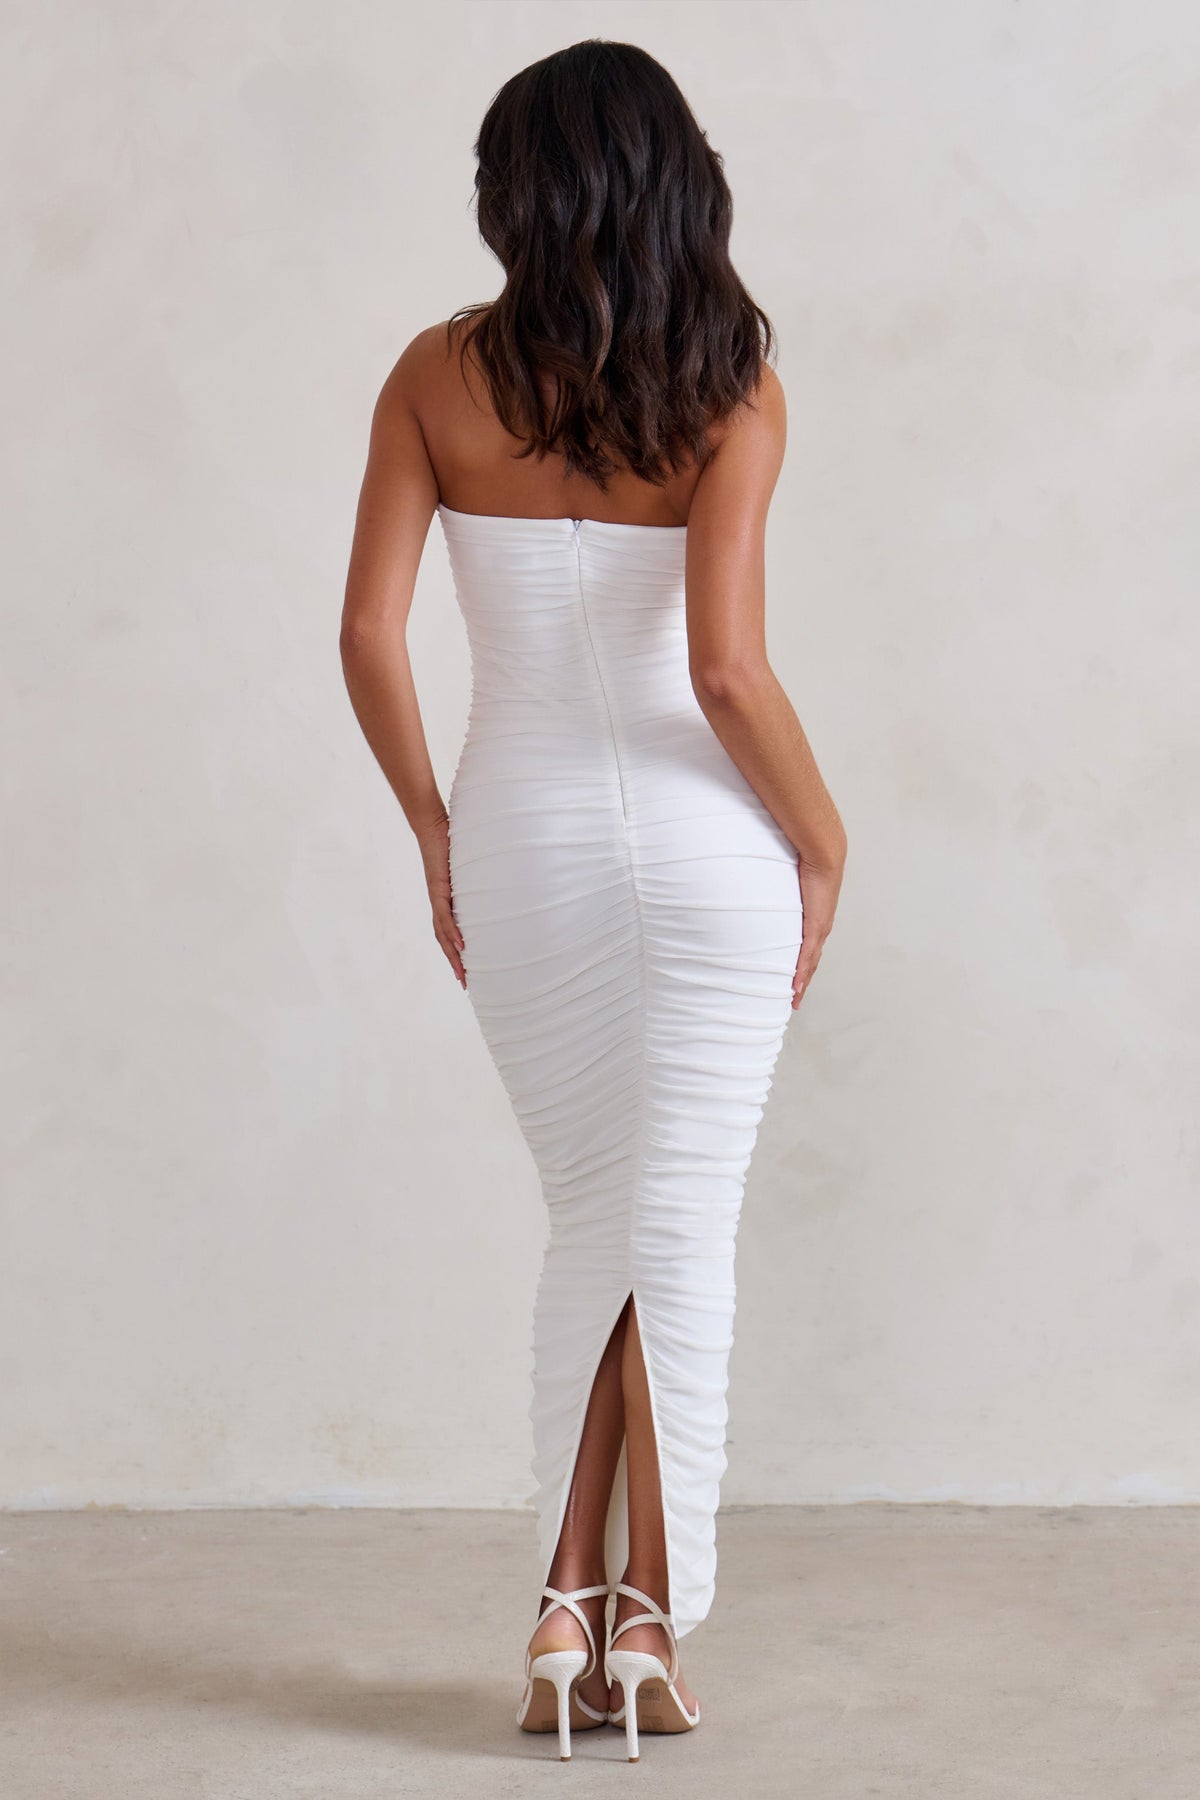 My Lady White Strapless Bodycon Ruched Mesh Maxi Dress – Club L London - IRE